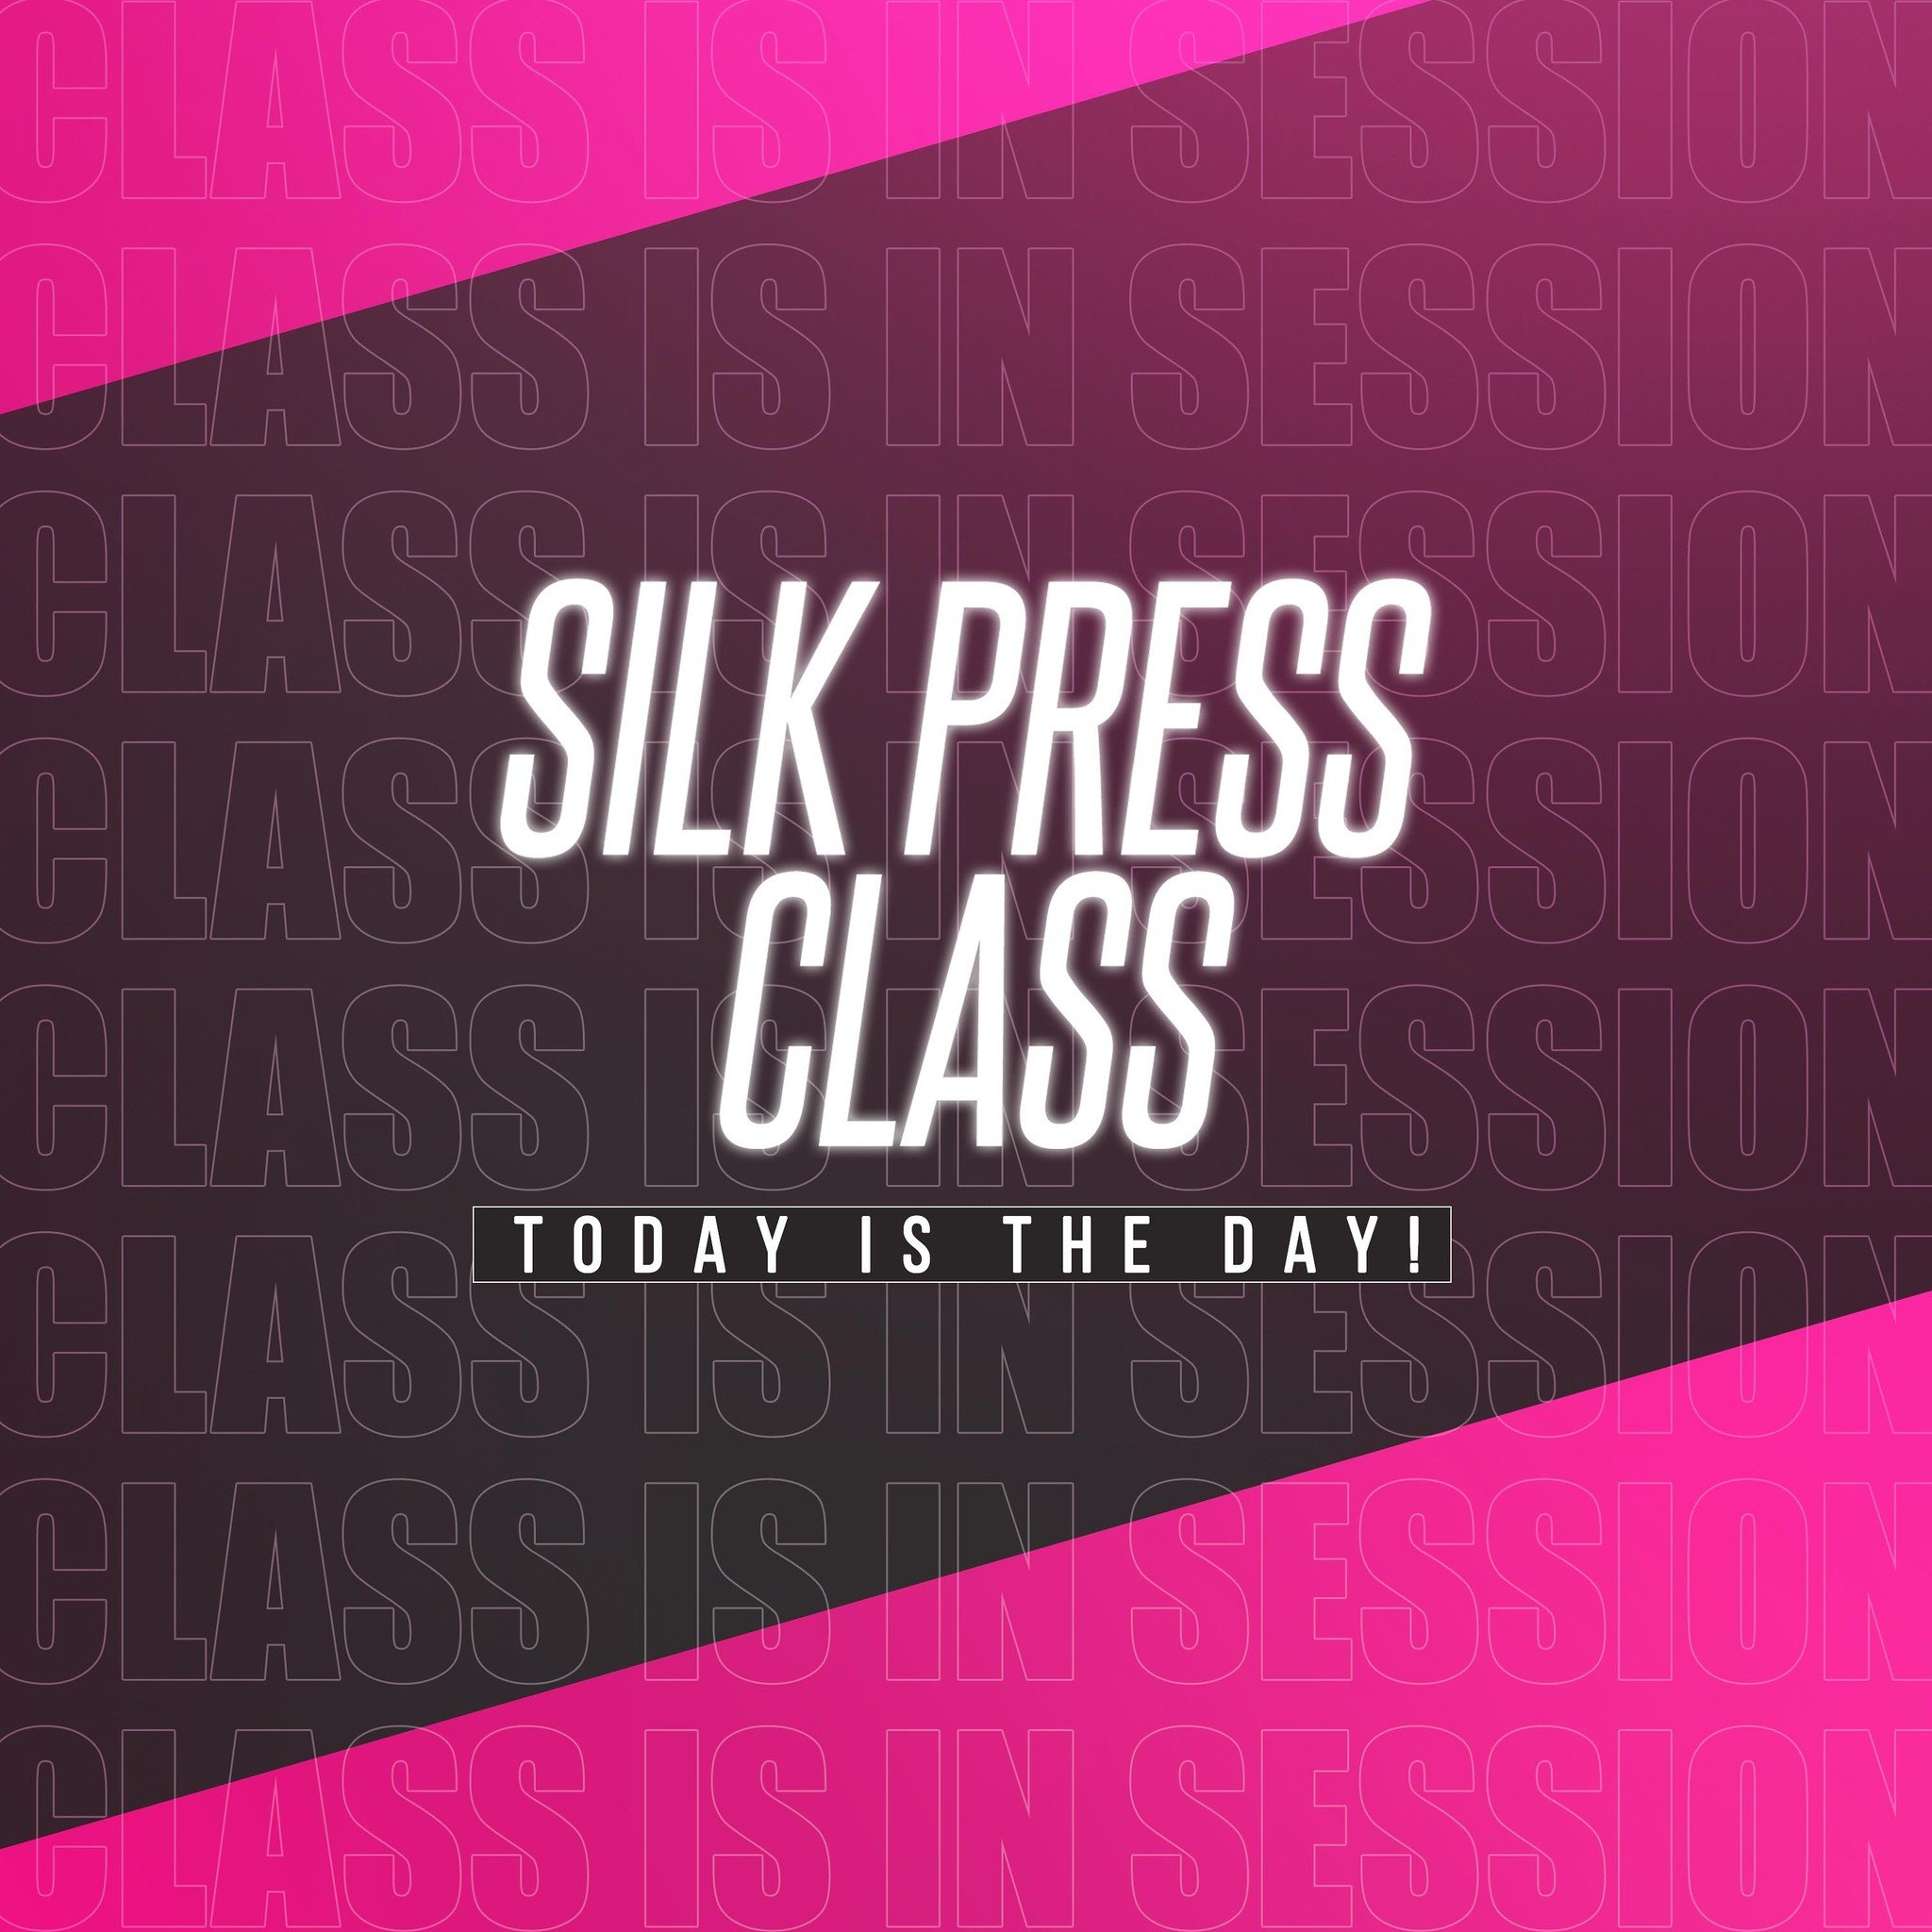 Class is in session&hellip;I am so excited for my silk press class/webinar happening tonight. Thank you to those who have registered. See you soon!